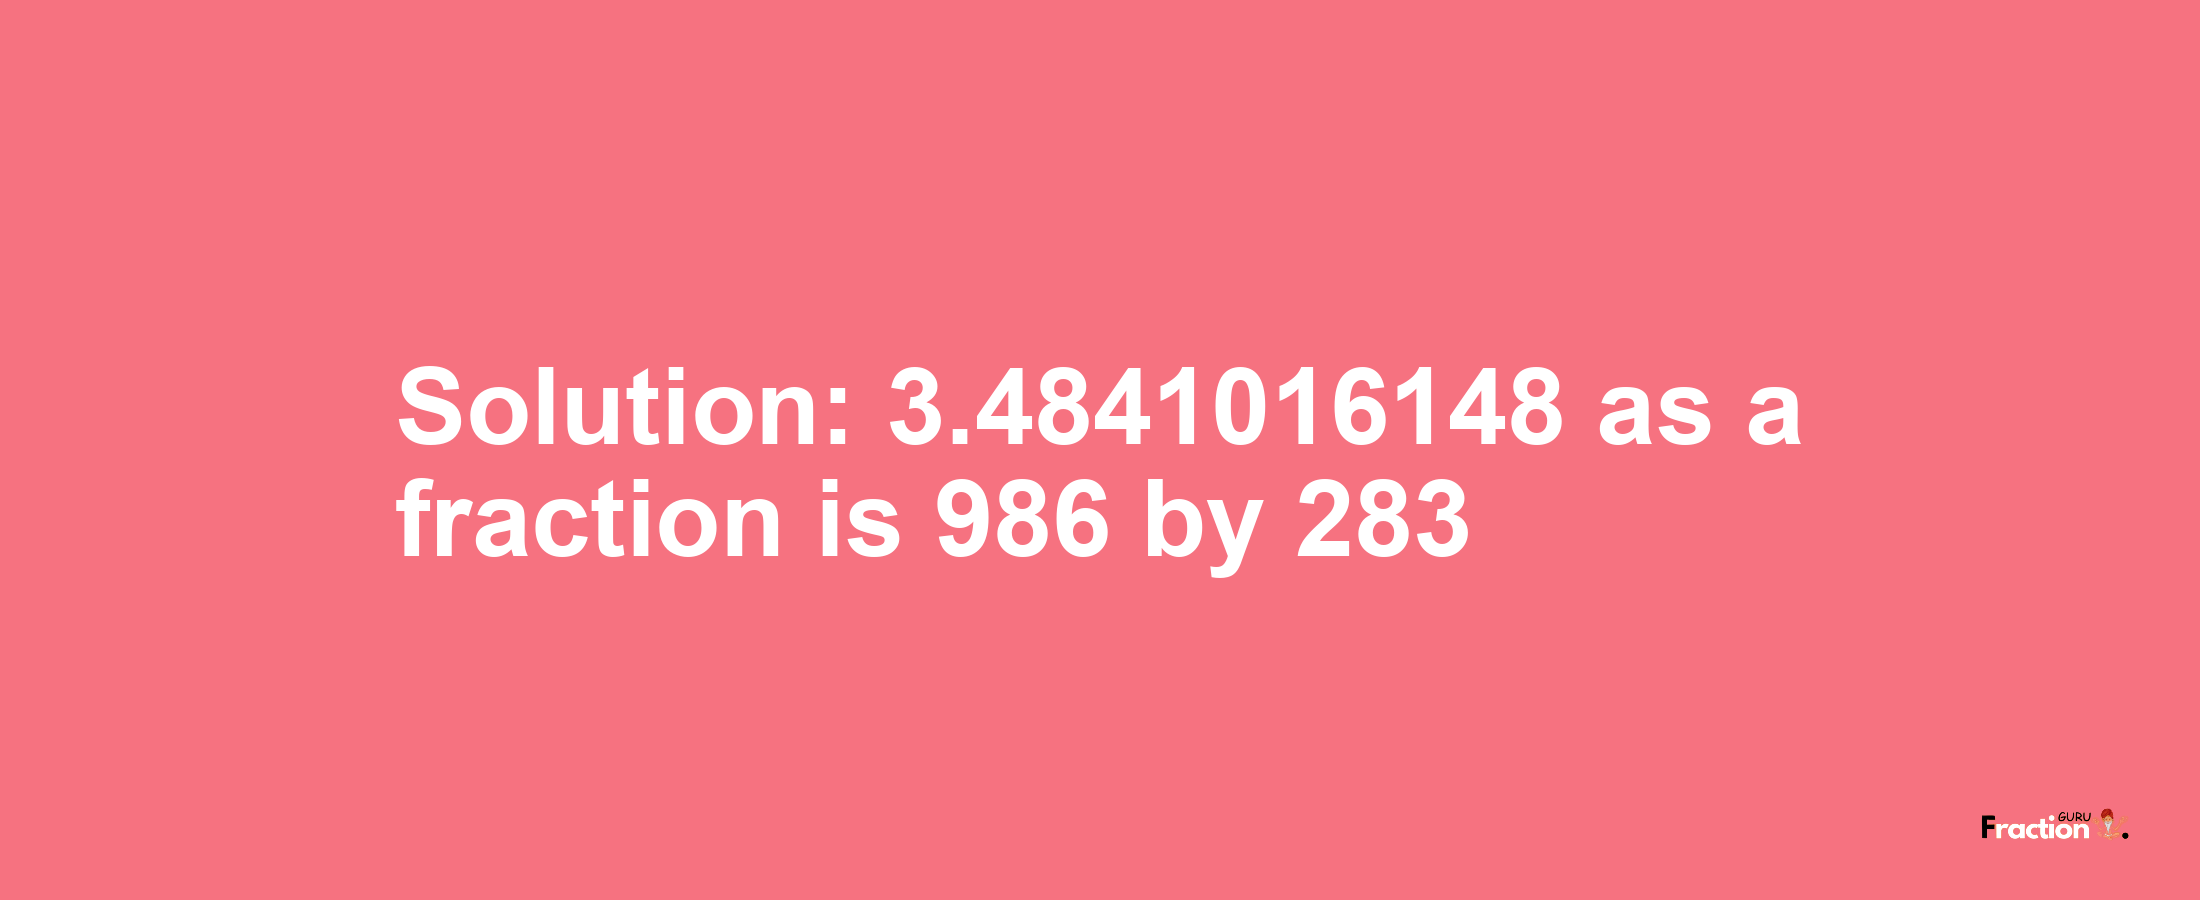 Solution:3.4841016148 as a fraction is 986/283